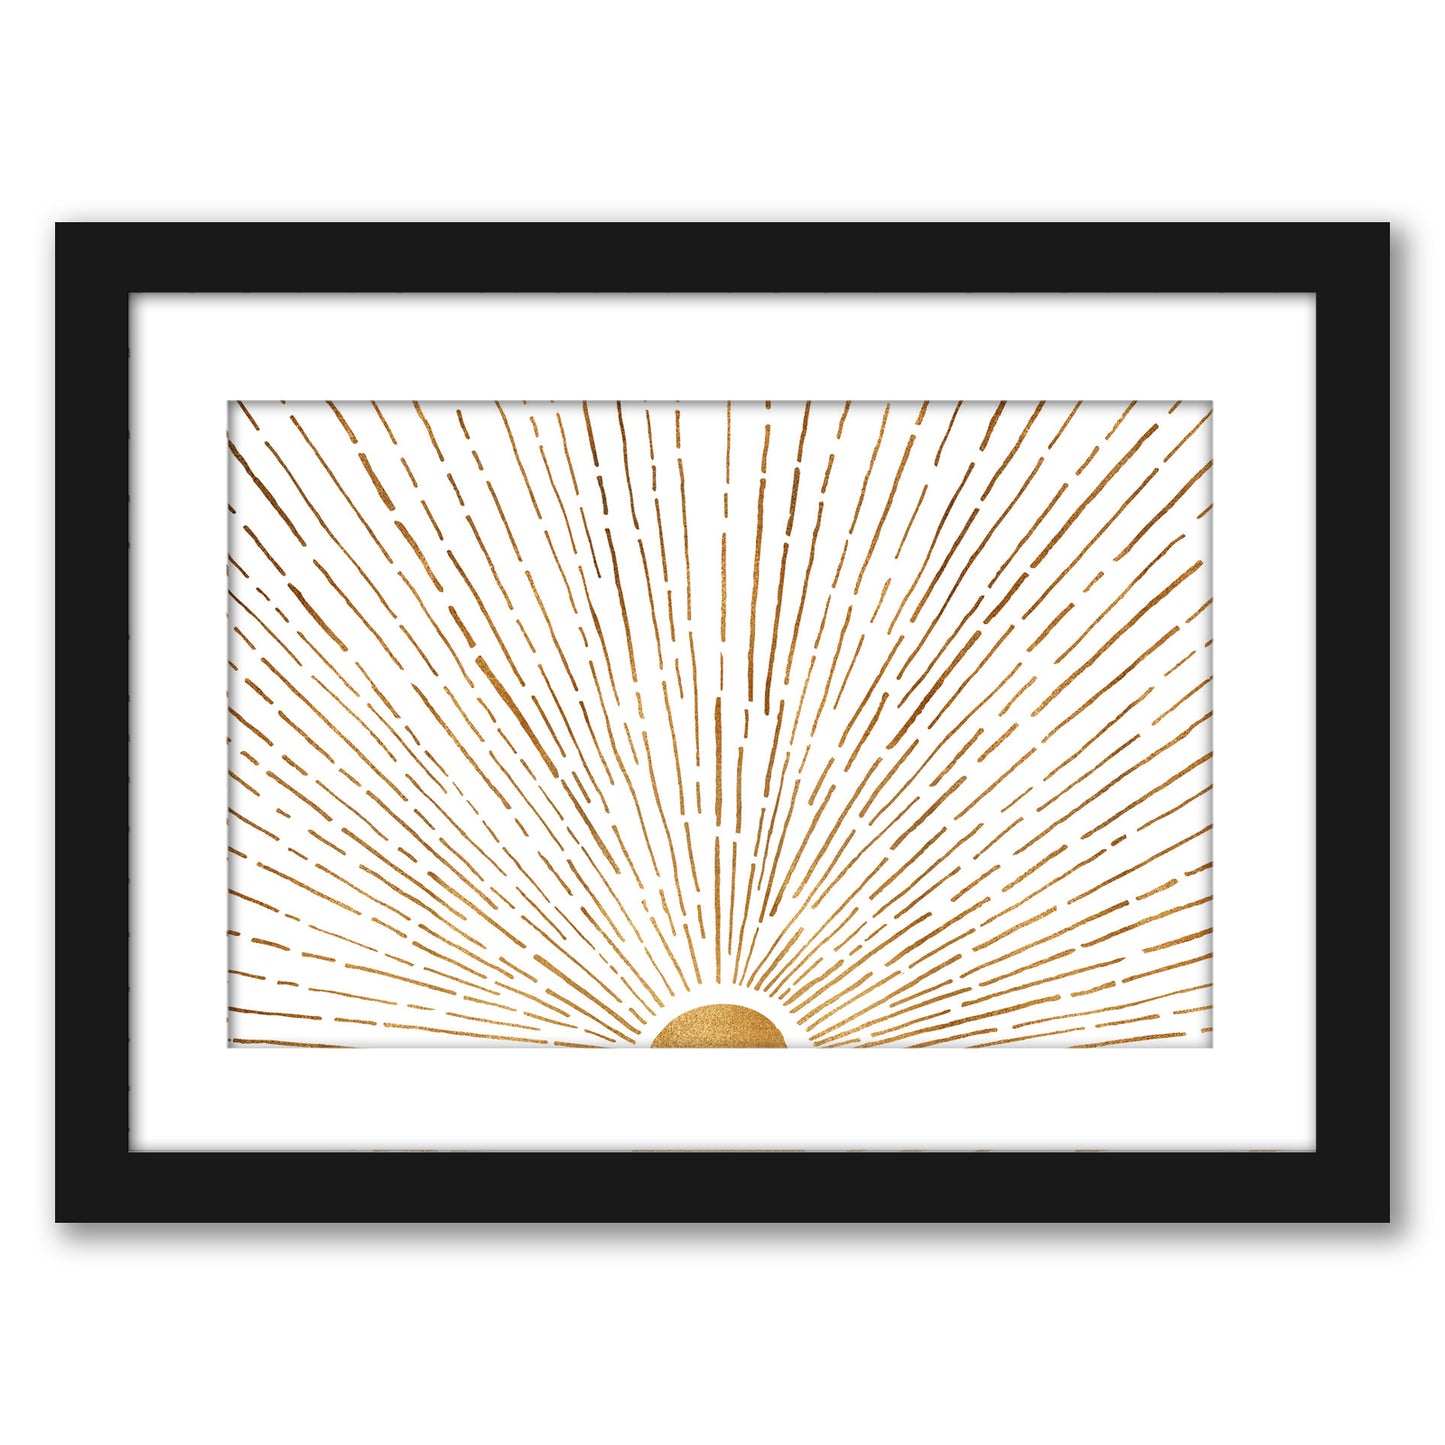 Let The Sunshine In By Modern Tropical - Framed Print - Americanflat